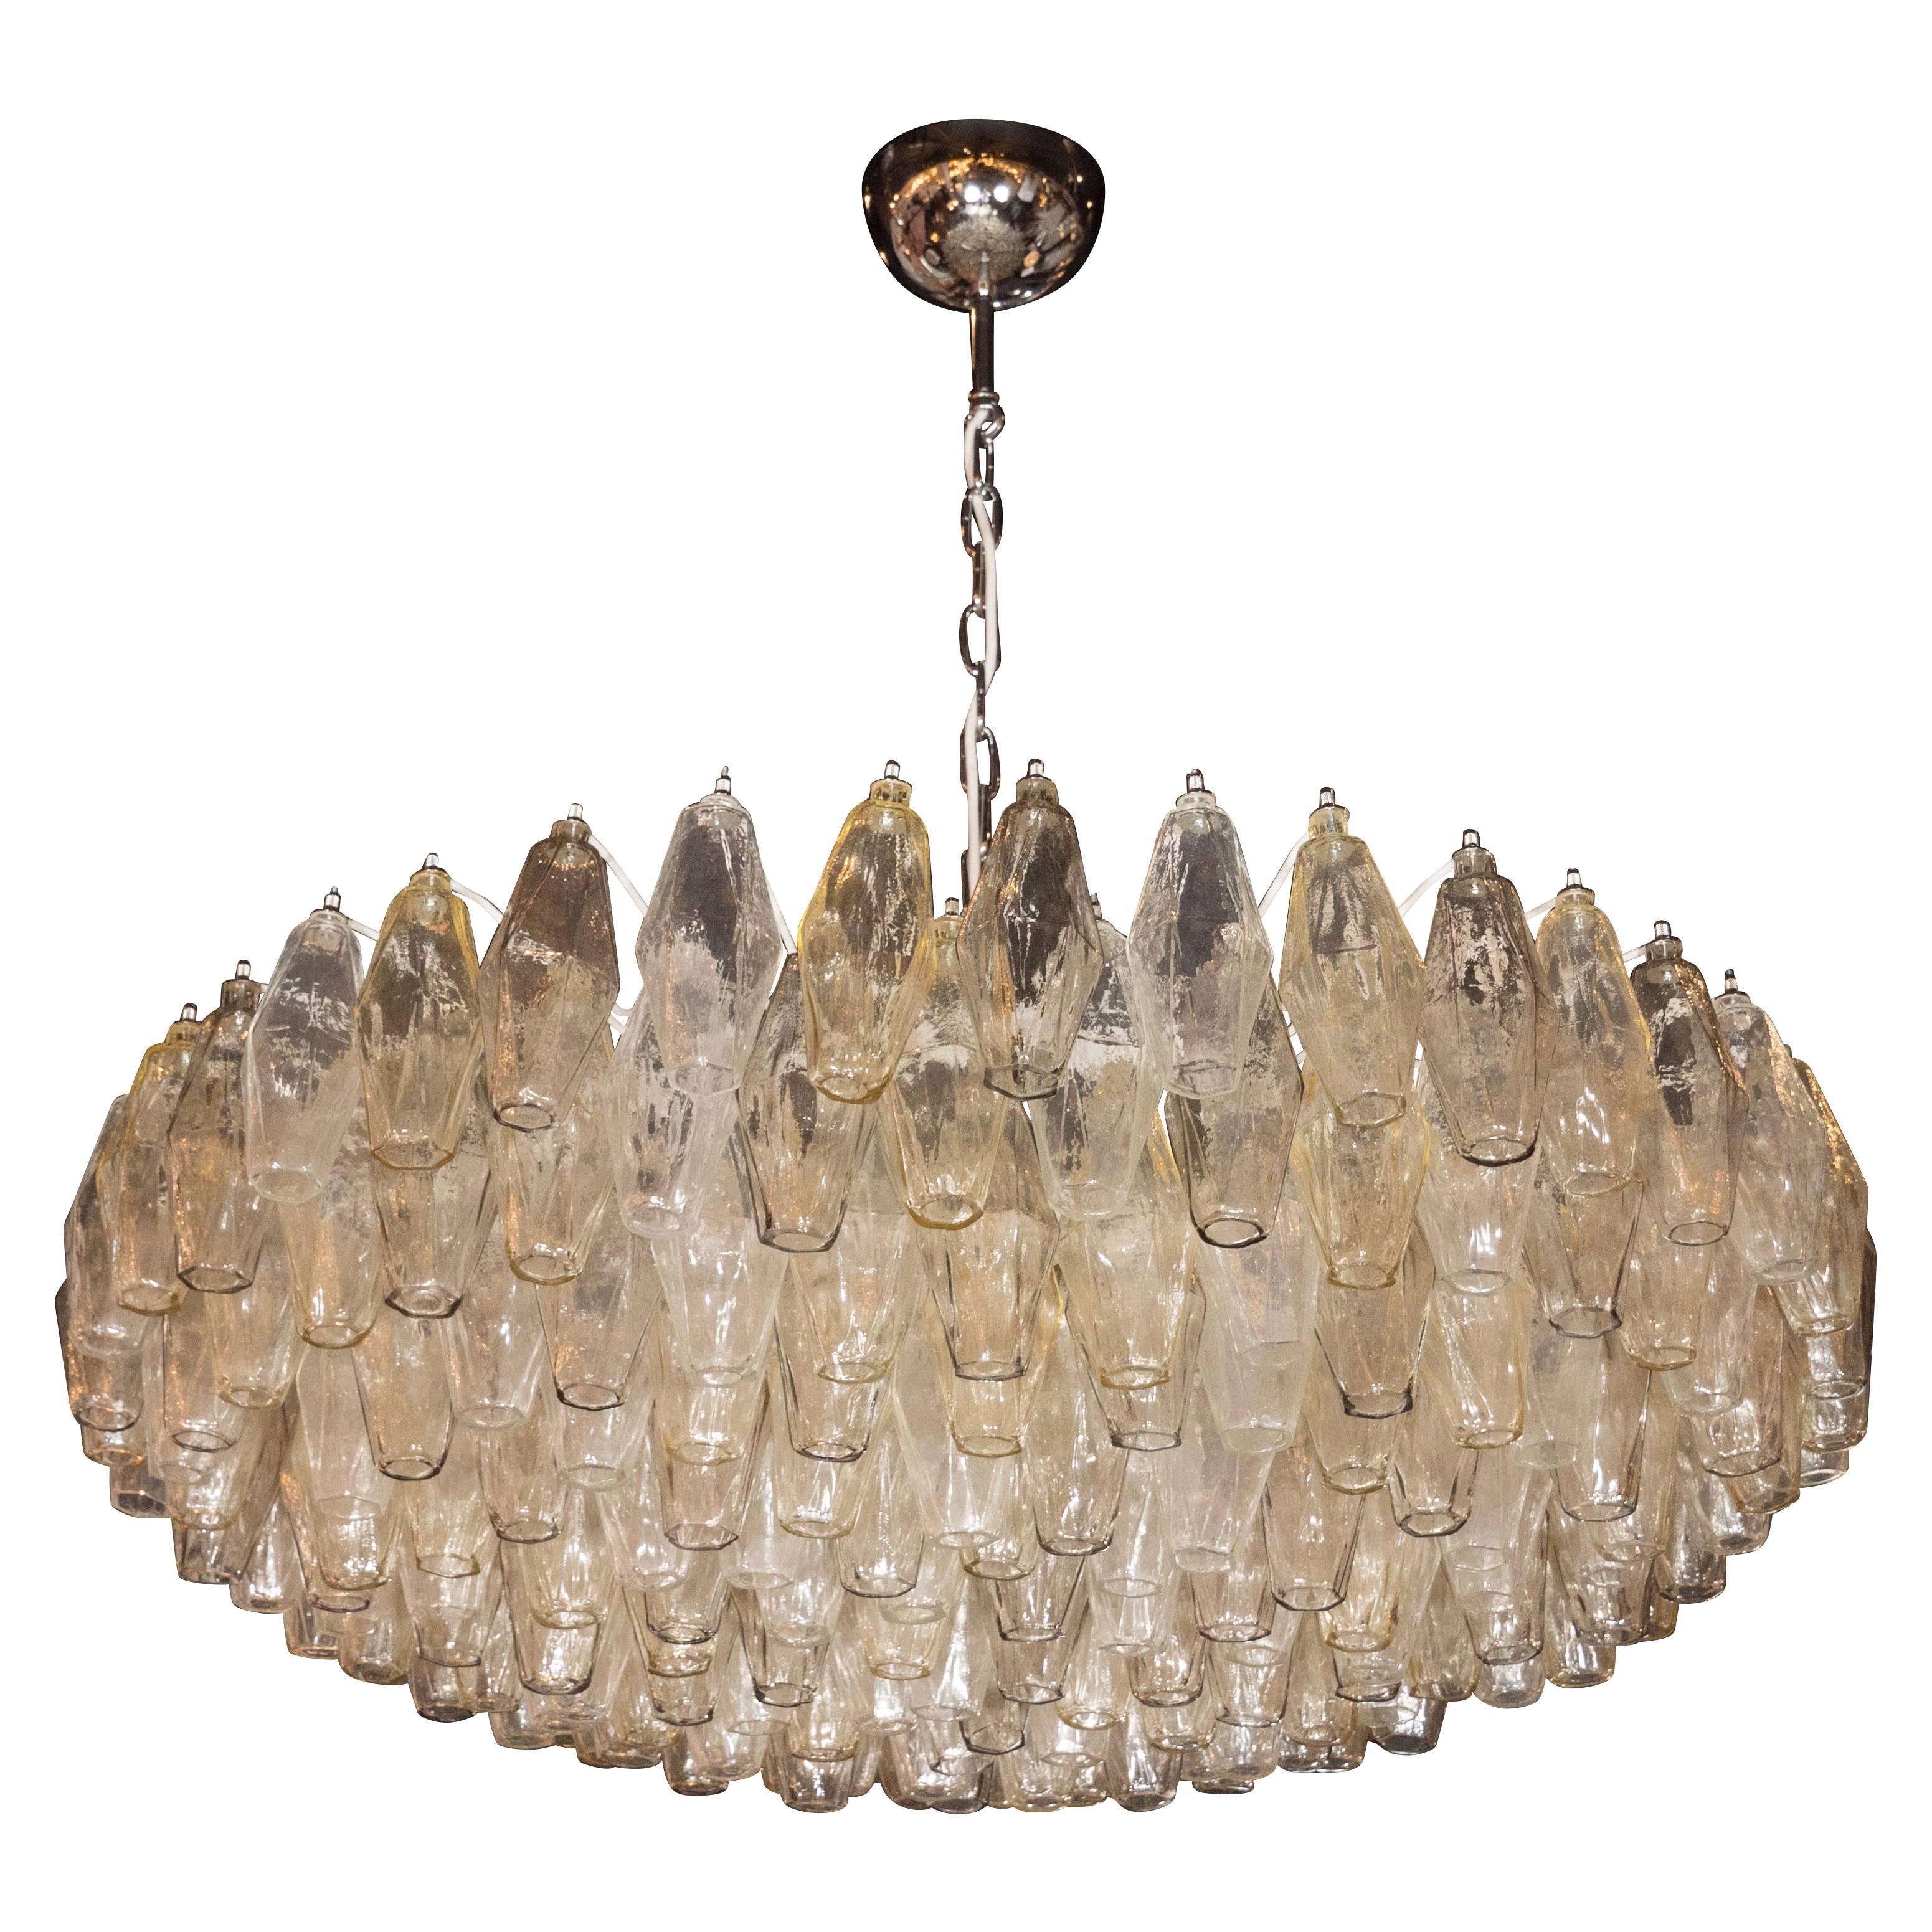 Modernist Murano Polyhedral Venini Chandelier, Nickel Fittings in Smoked Topaz